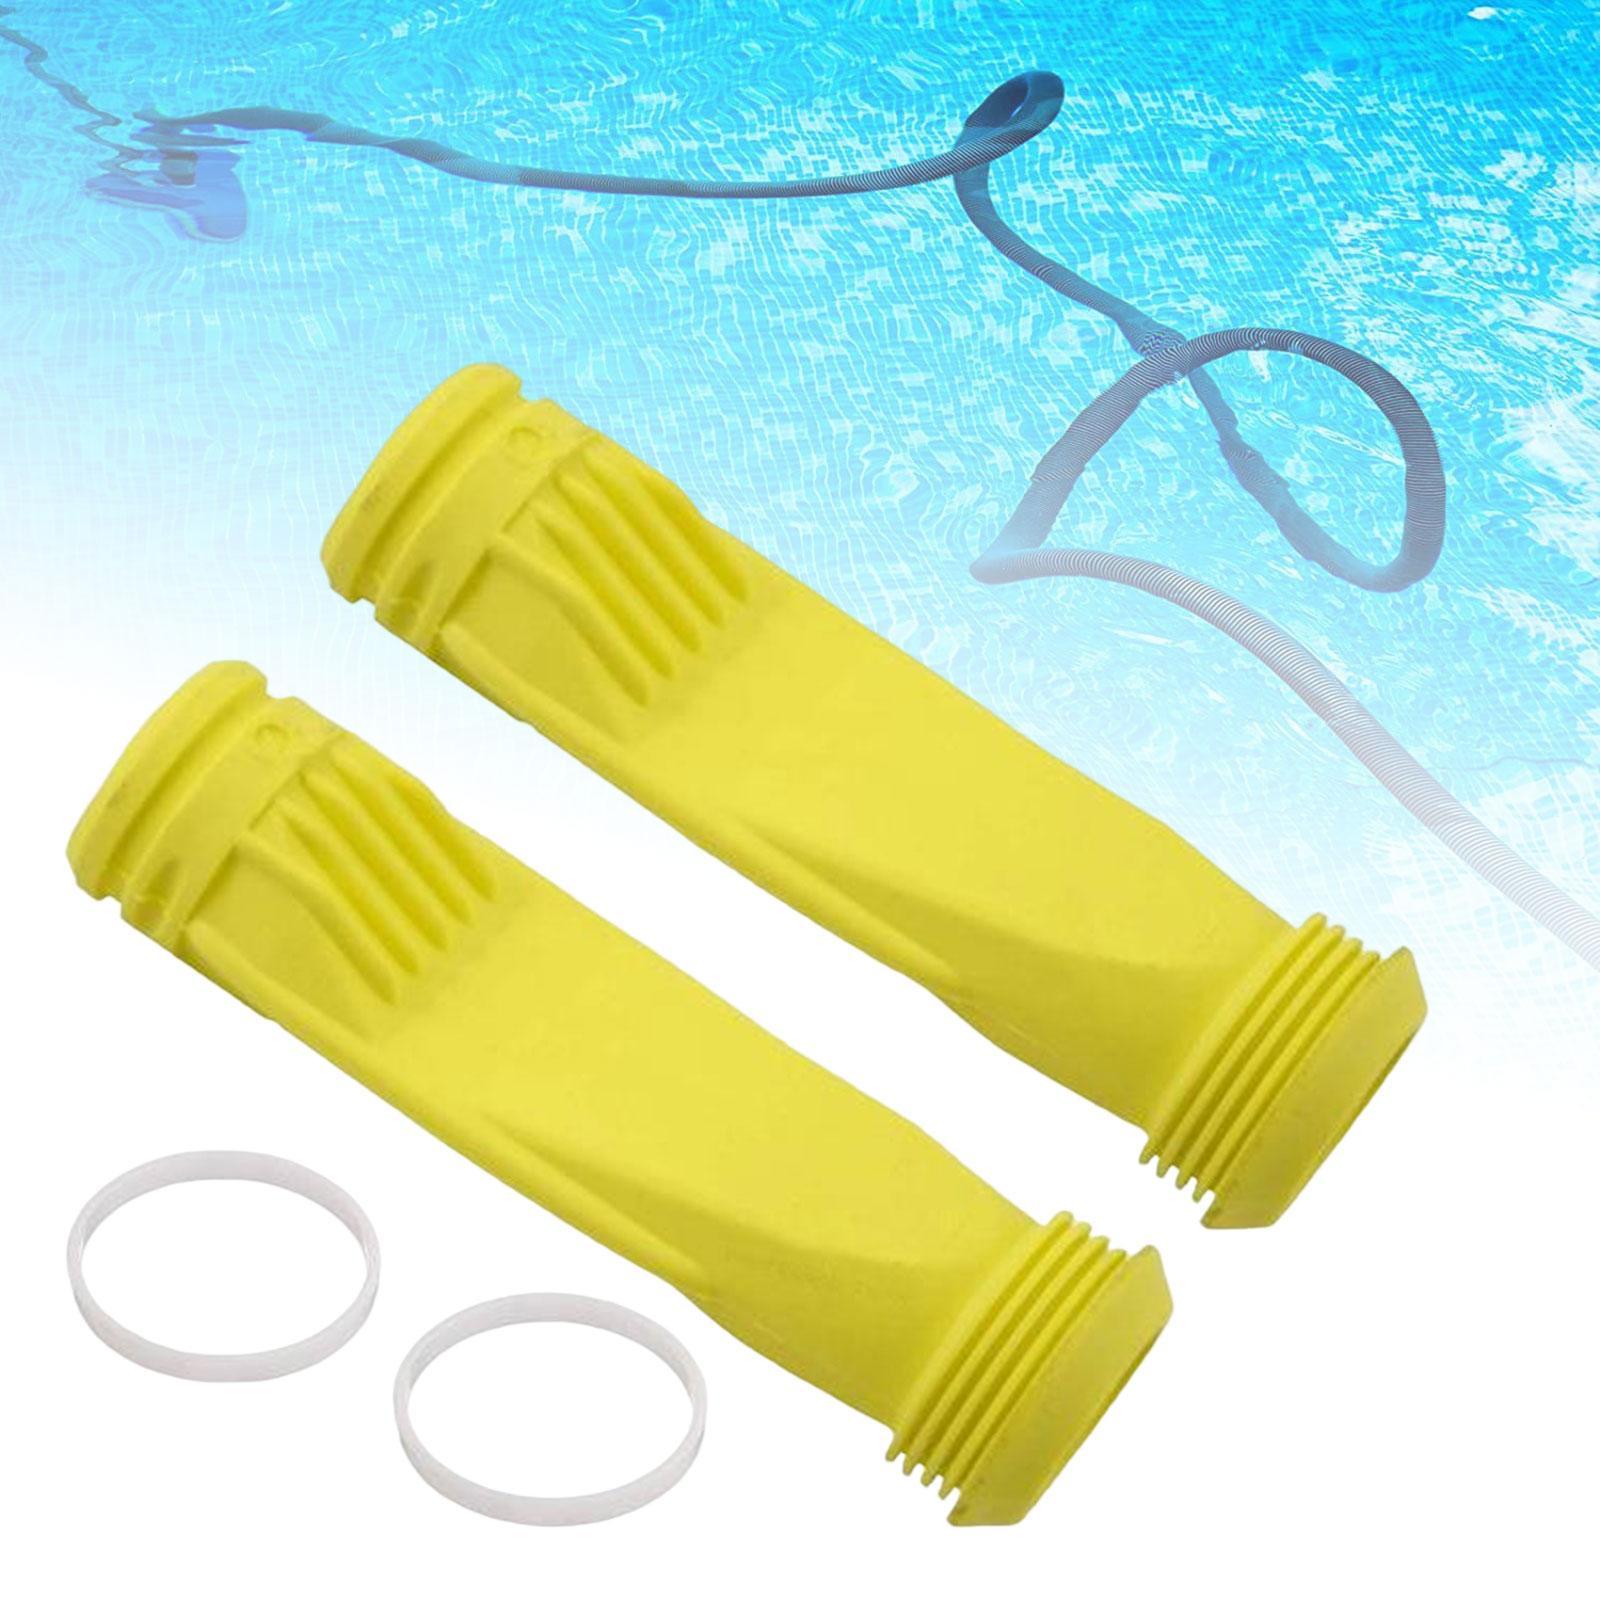 2x Pool Cleaner Diaphragm Easy to Mount Professional Portable Strong Replaces Long Service Life Heavy Duty with Retaining Ring